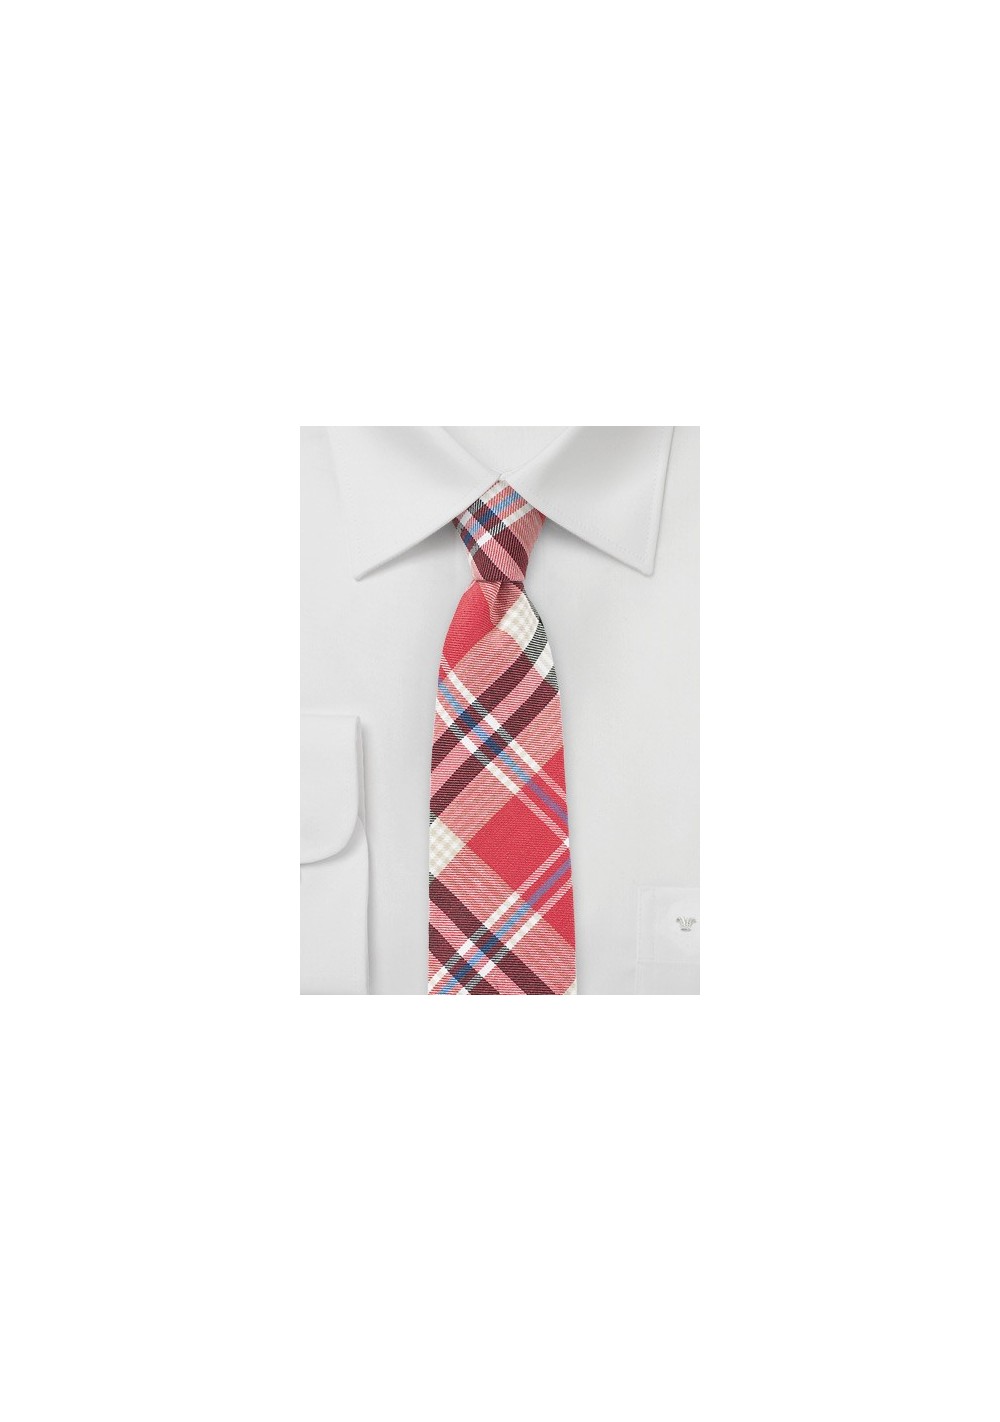 Cotton Plaid Tie in Red, White, and Black